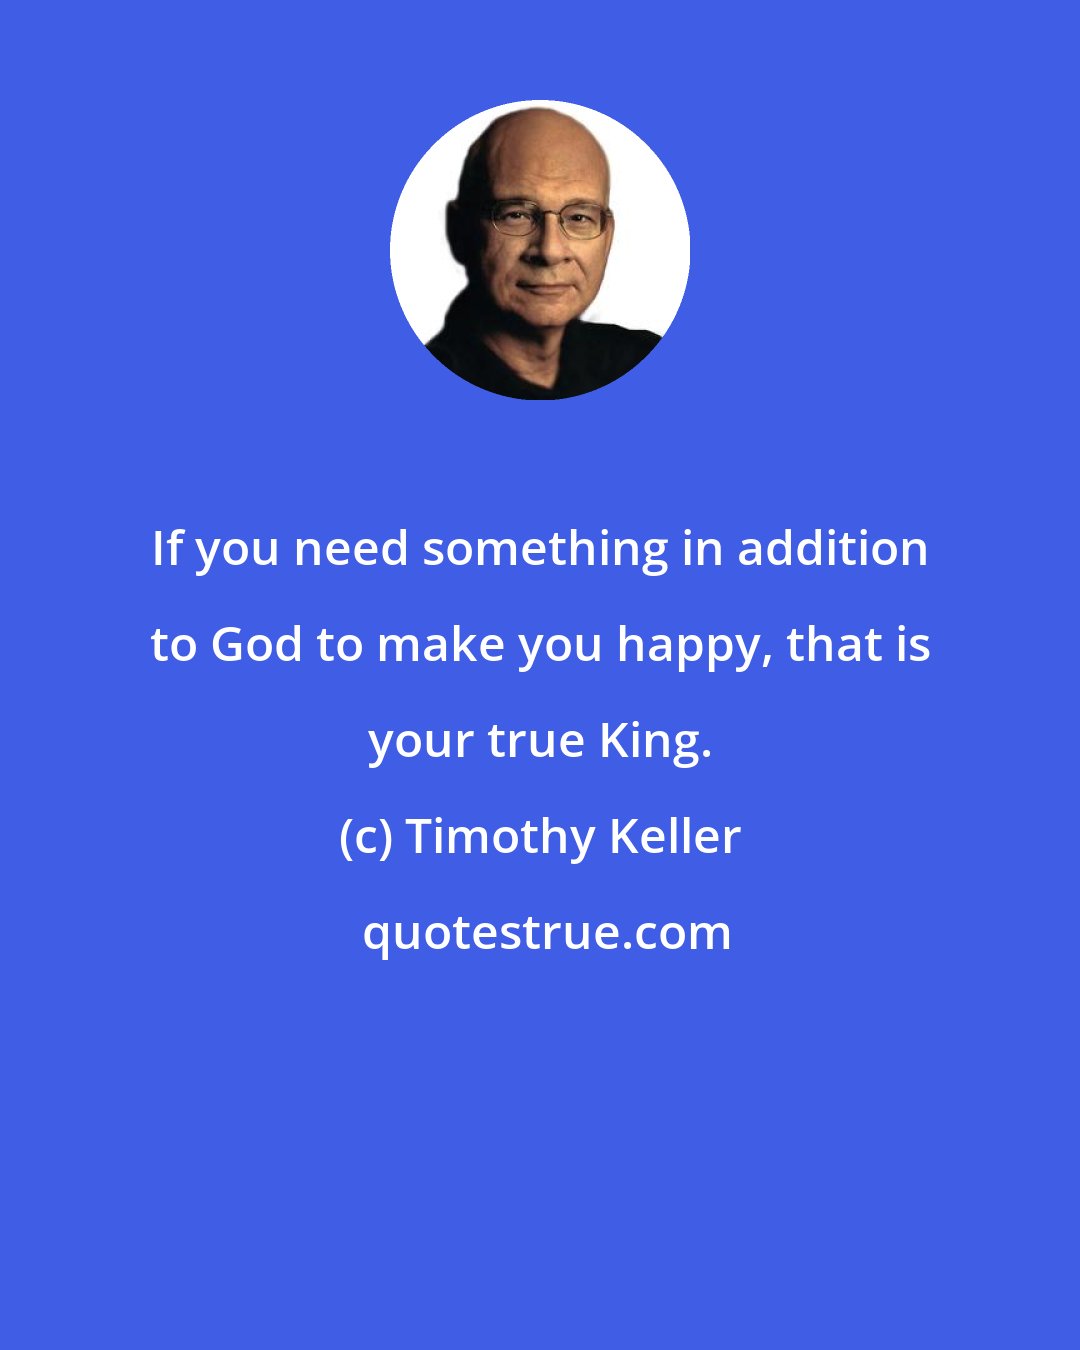 Timothy Keller: If you need something in addition to God to make you happy, that is your true King.